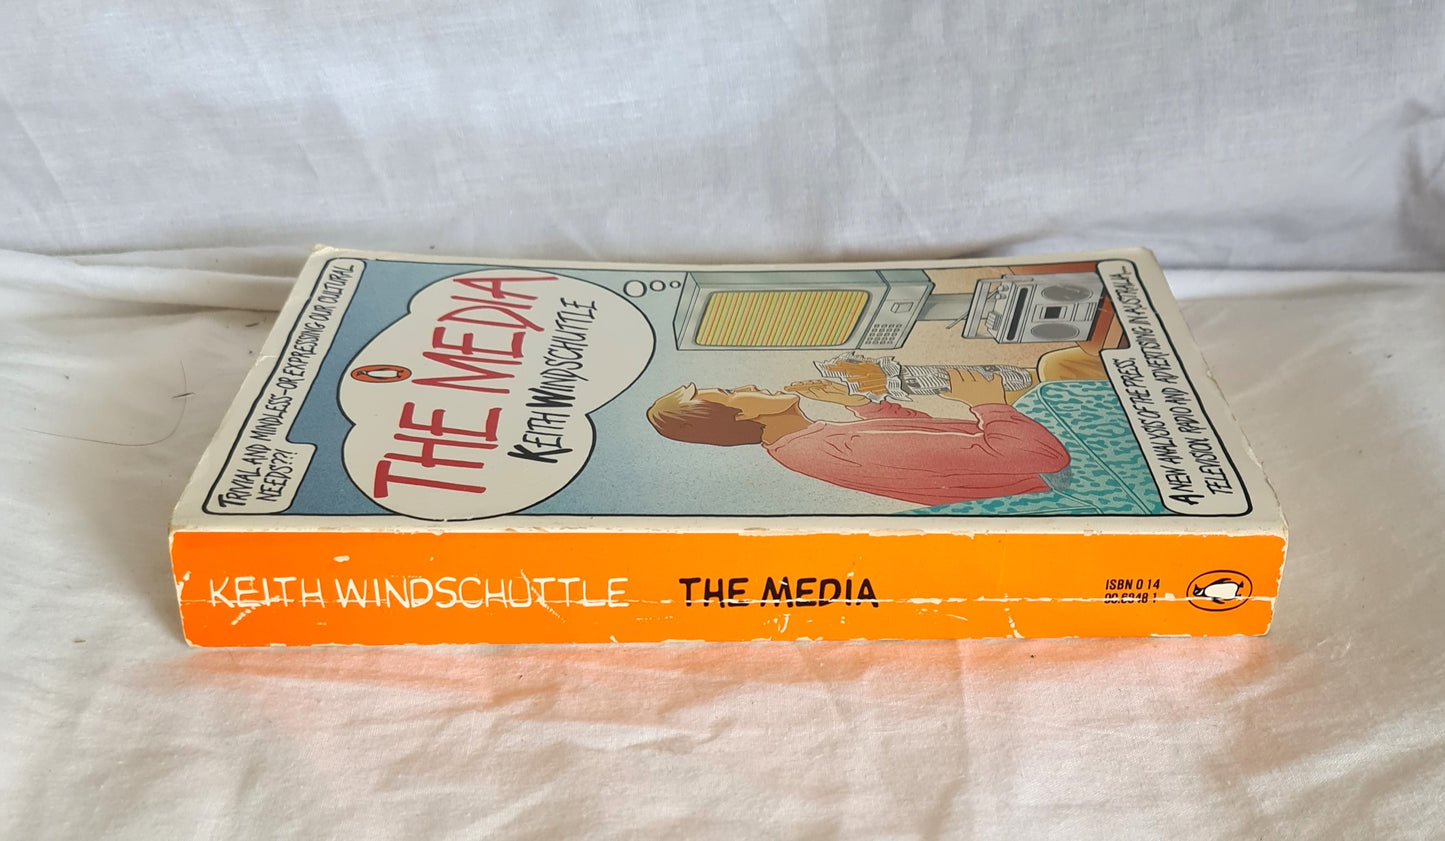 The Media by Keith Windschuttle